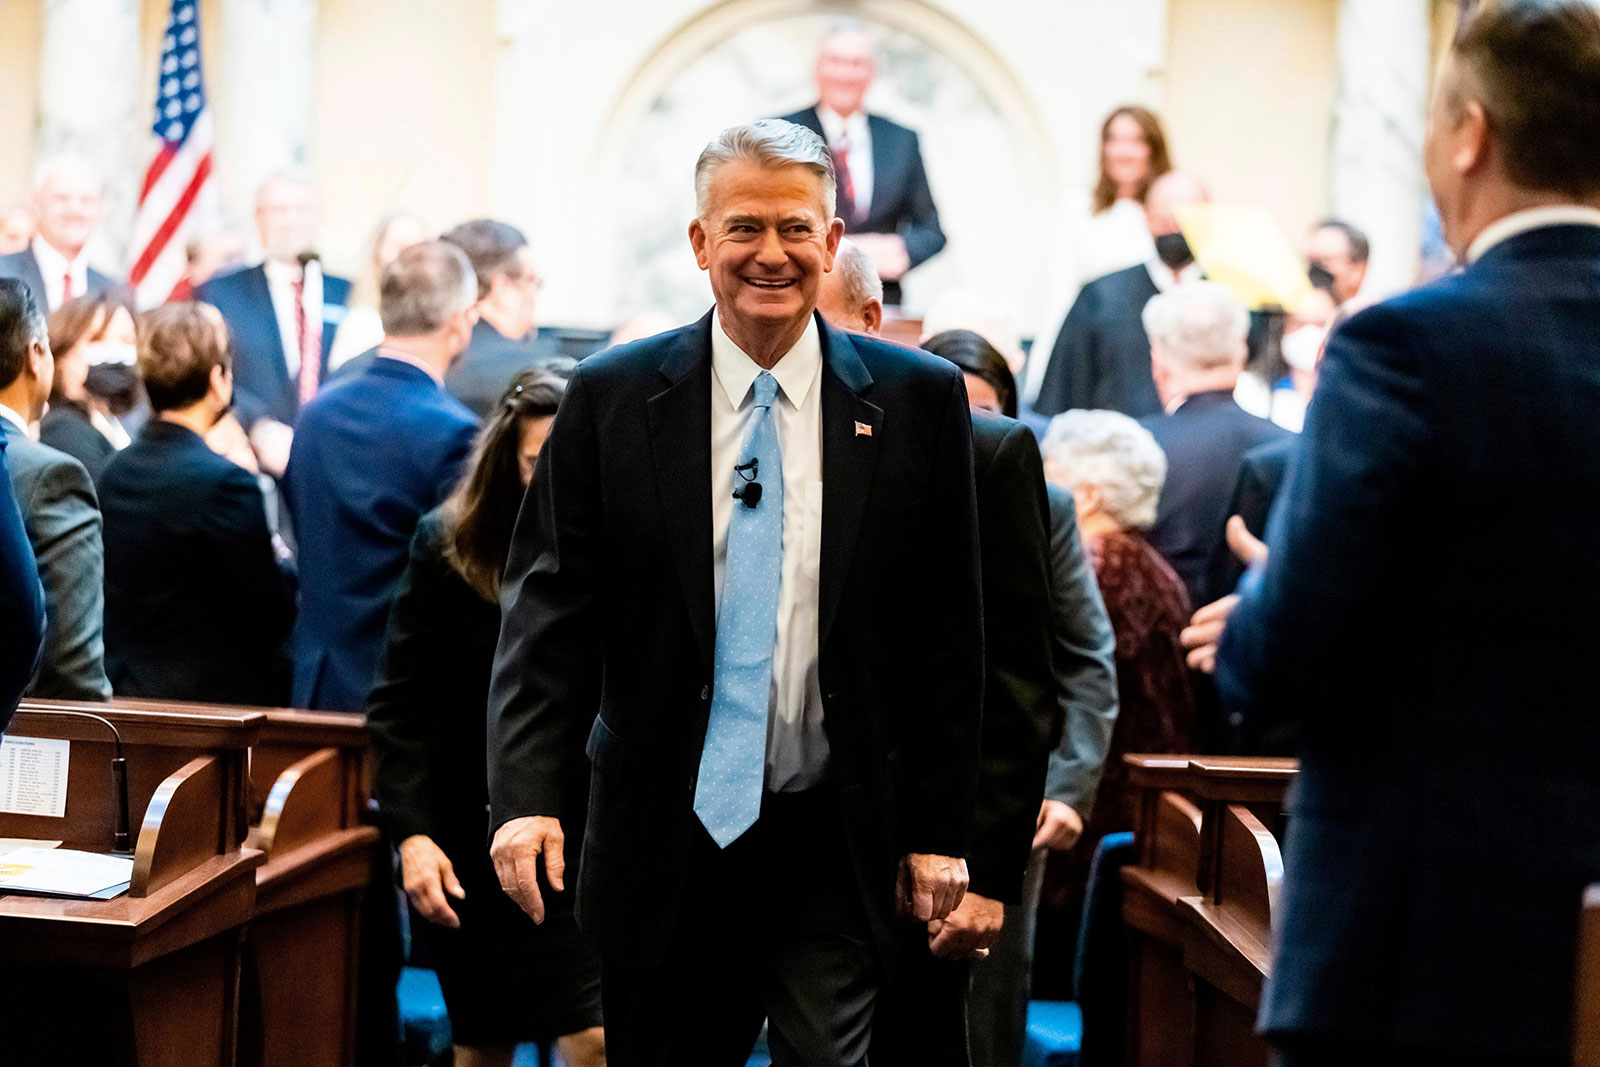 Idaho Gov. Brad Little leaves the house chambers after he delivers his State of the State address at the state Capitol building on January 10 in Boise, Idaho. 